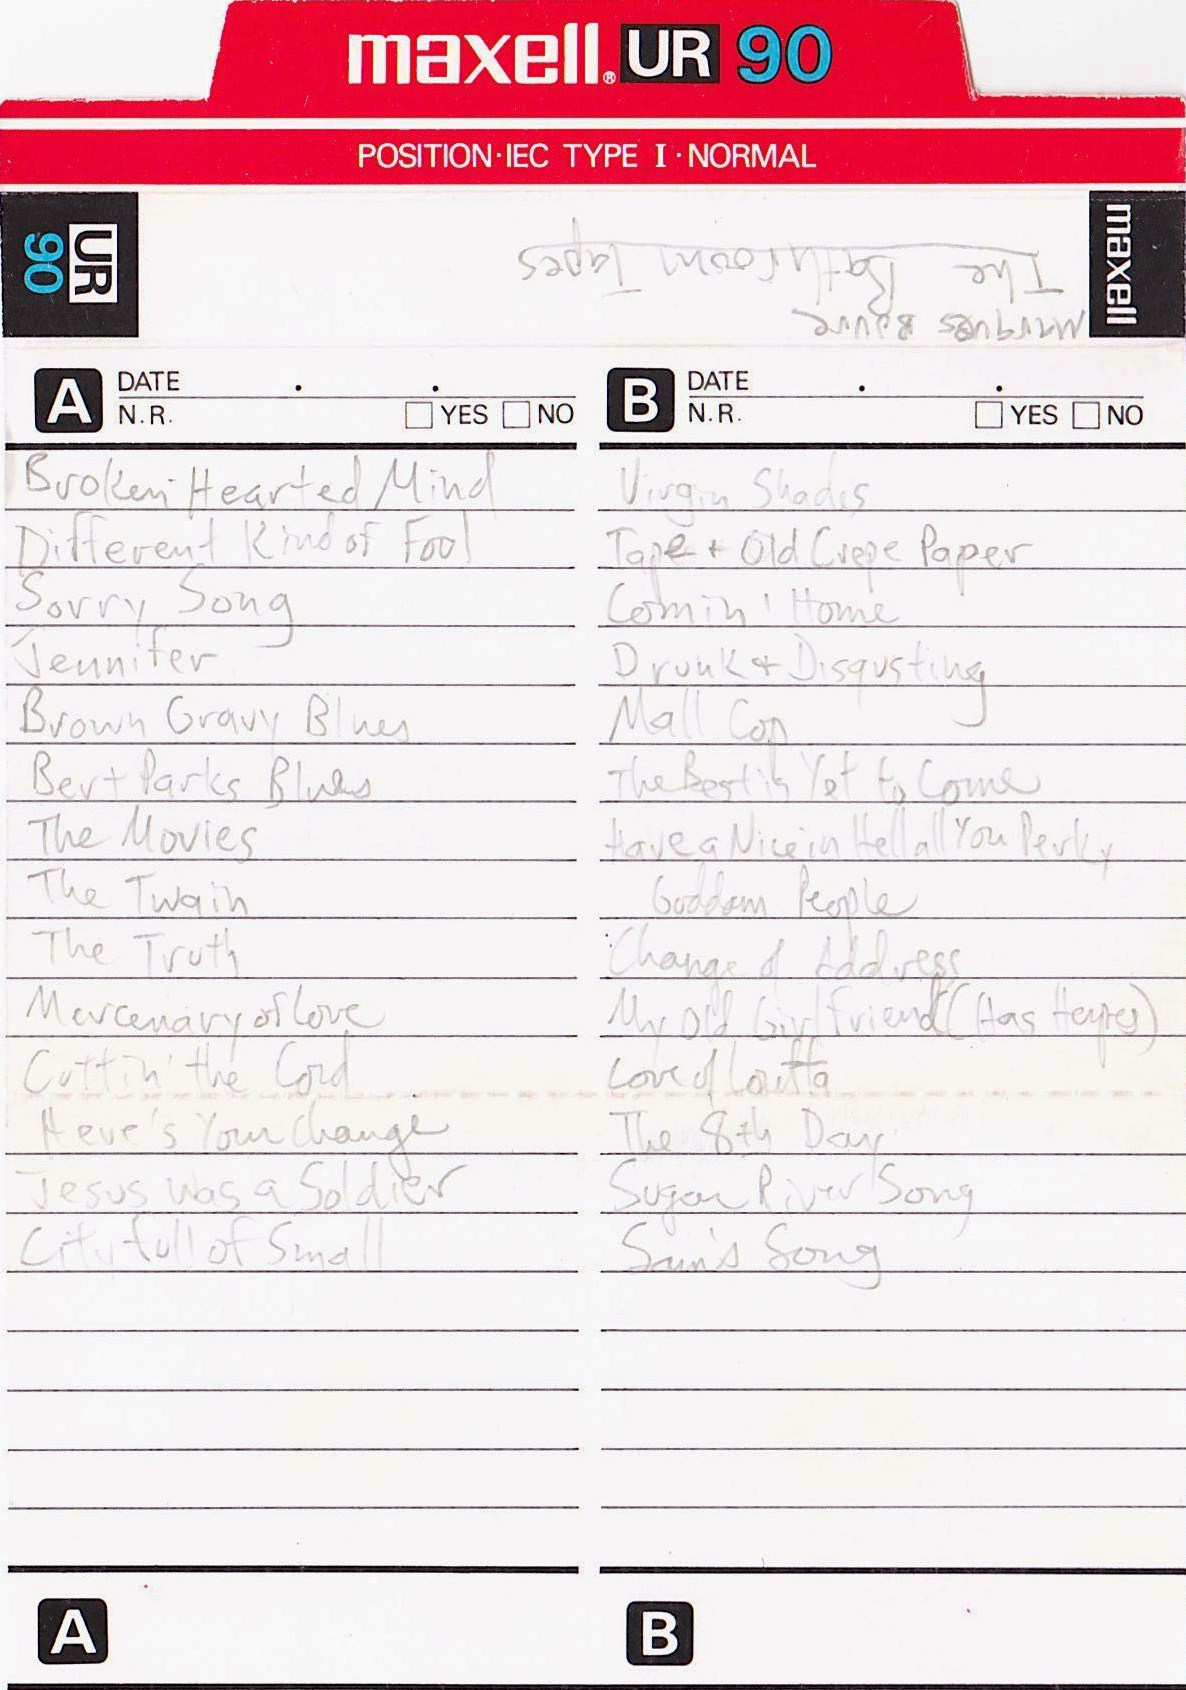 Jackie's copy of The Bathroom Tapes (J-card)